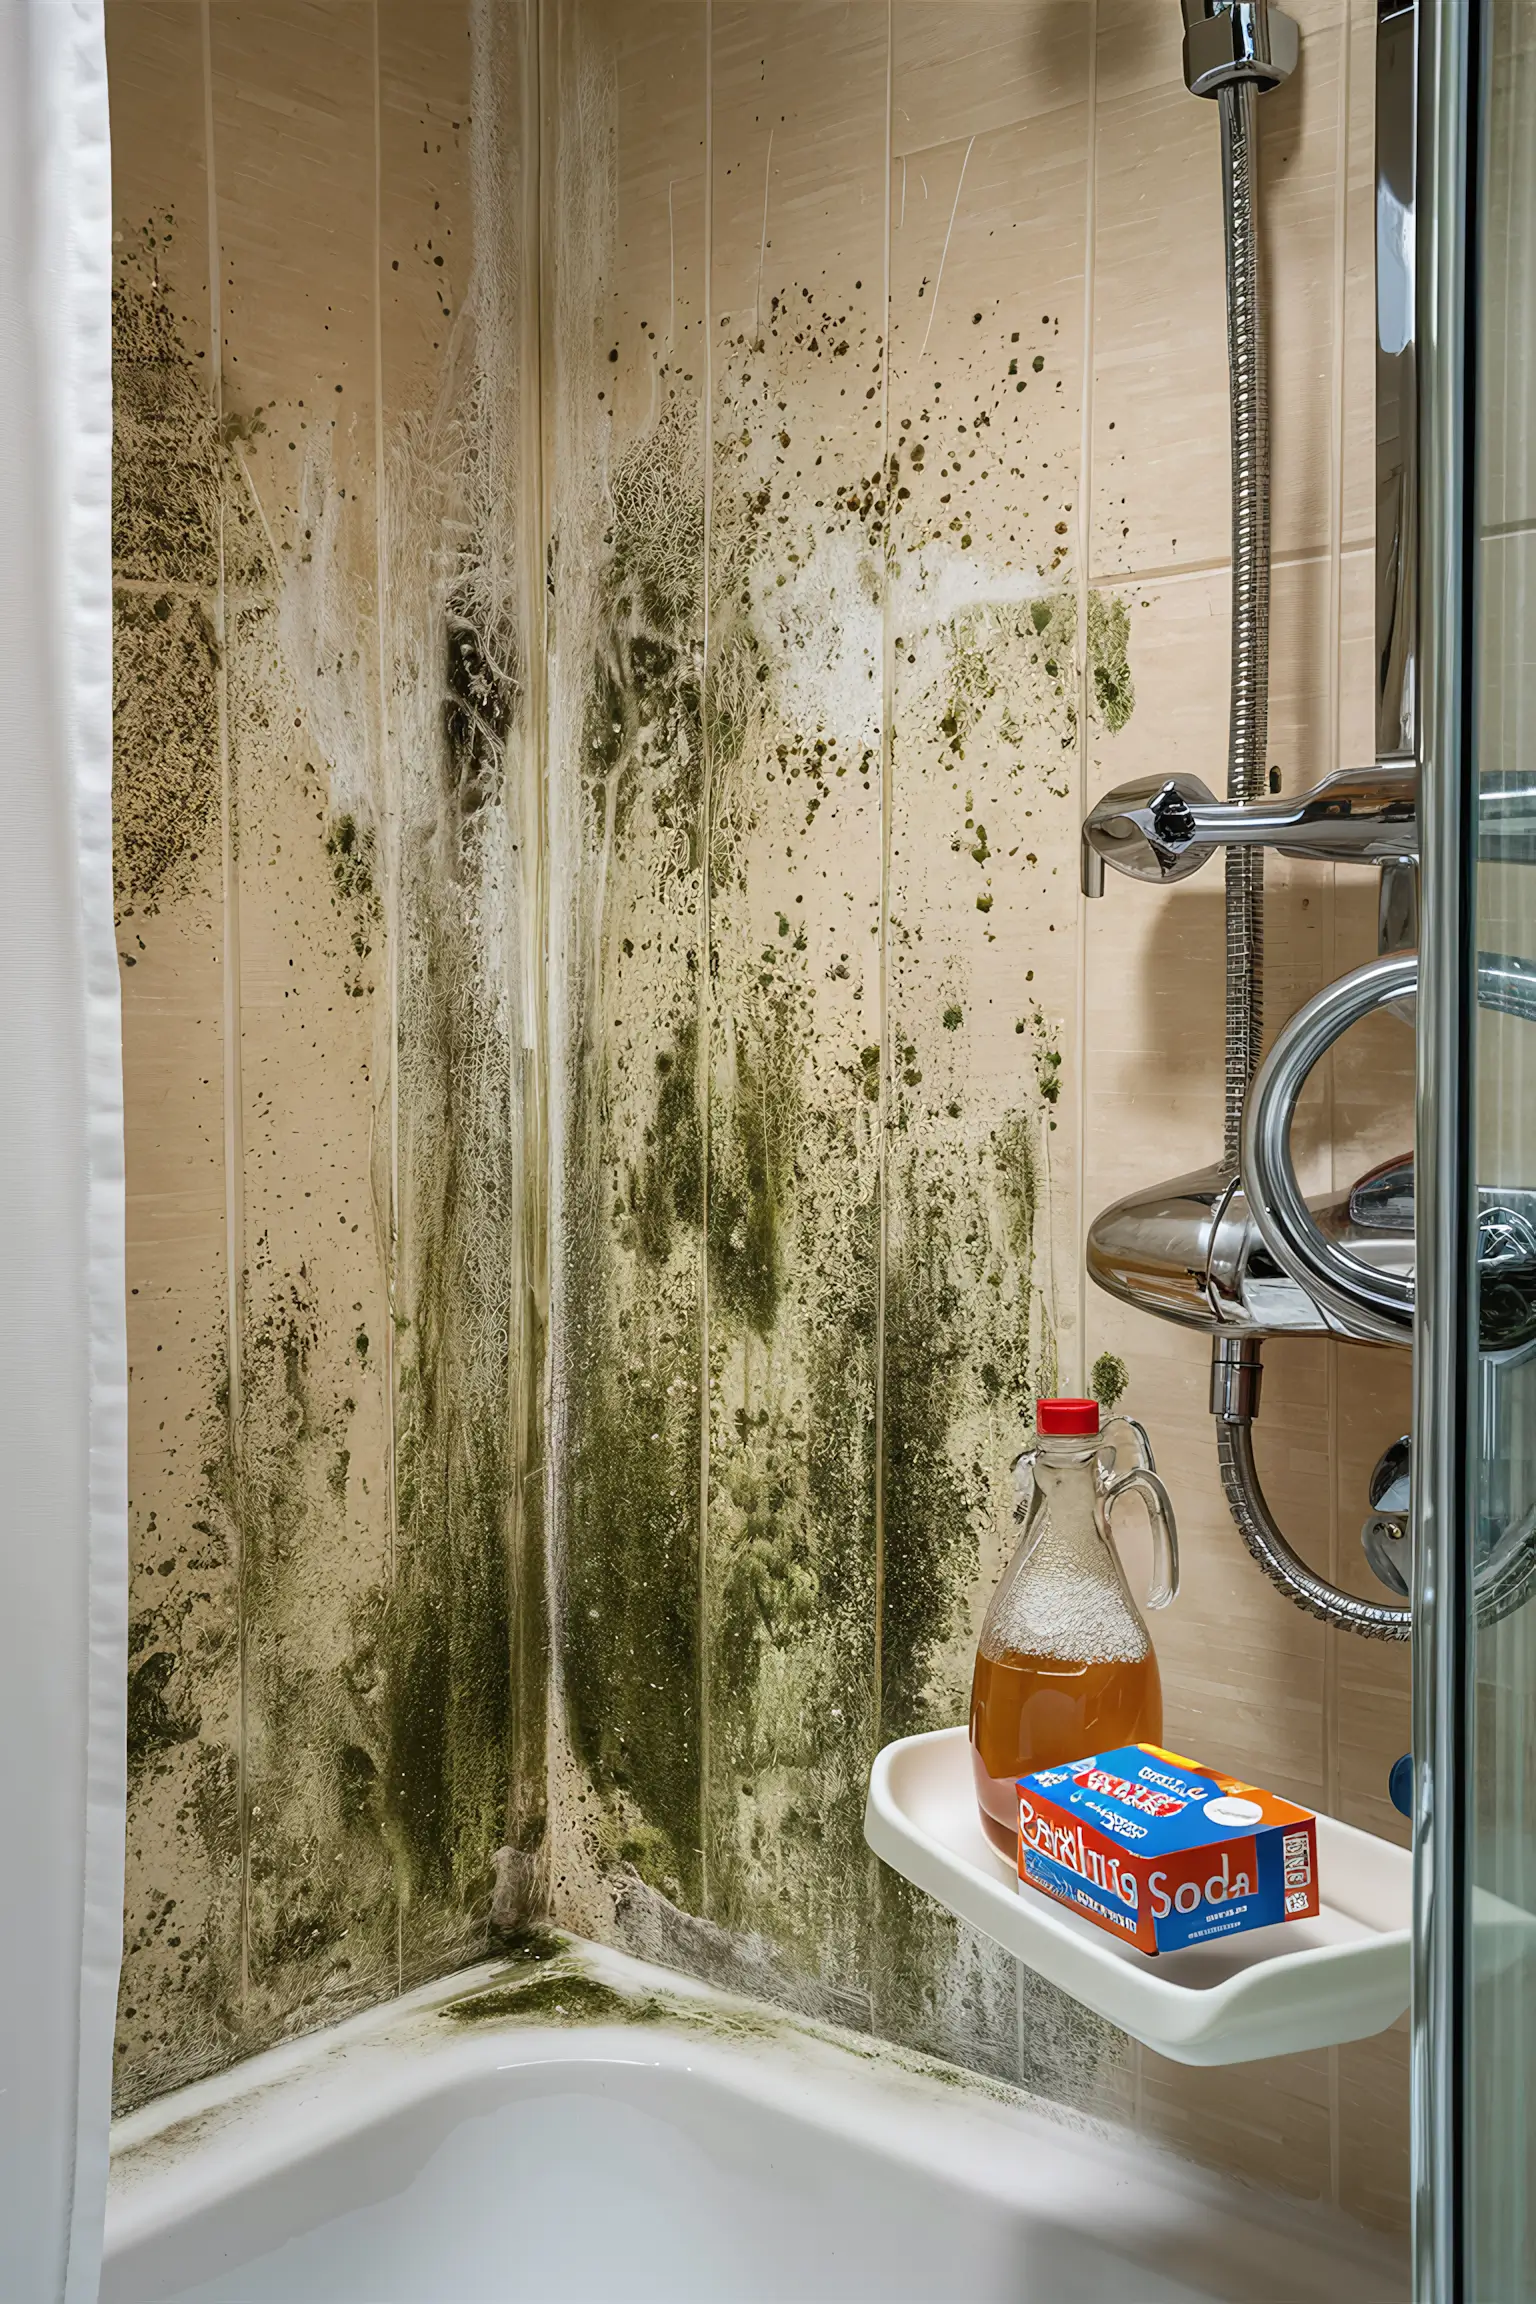 Mold-Busting Shower Cleaning Hacks